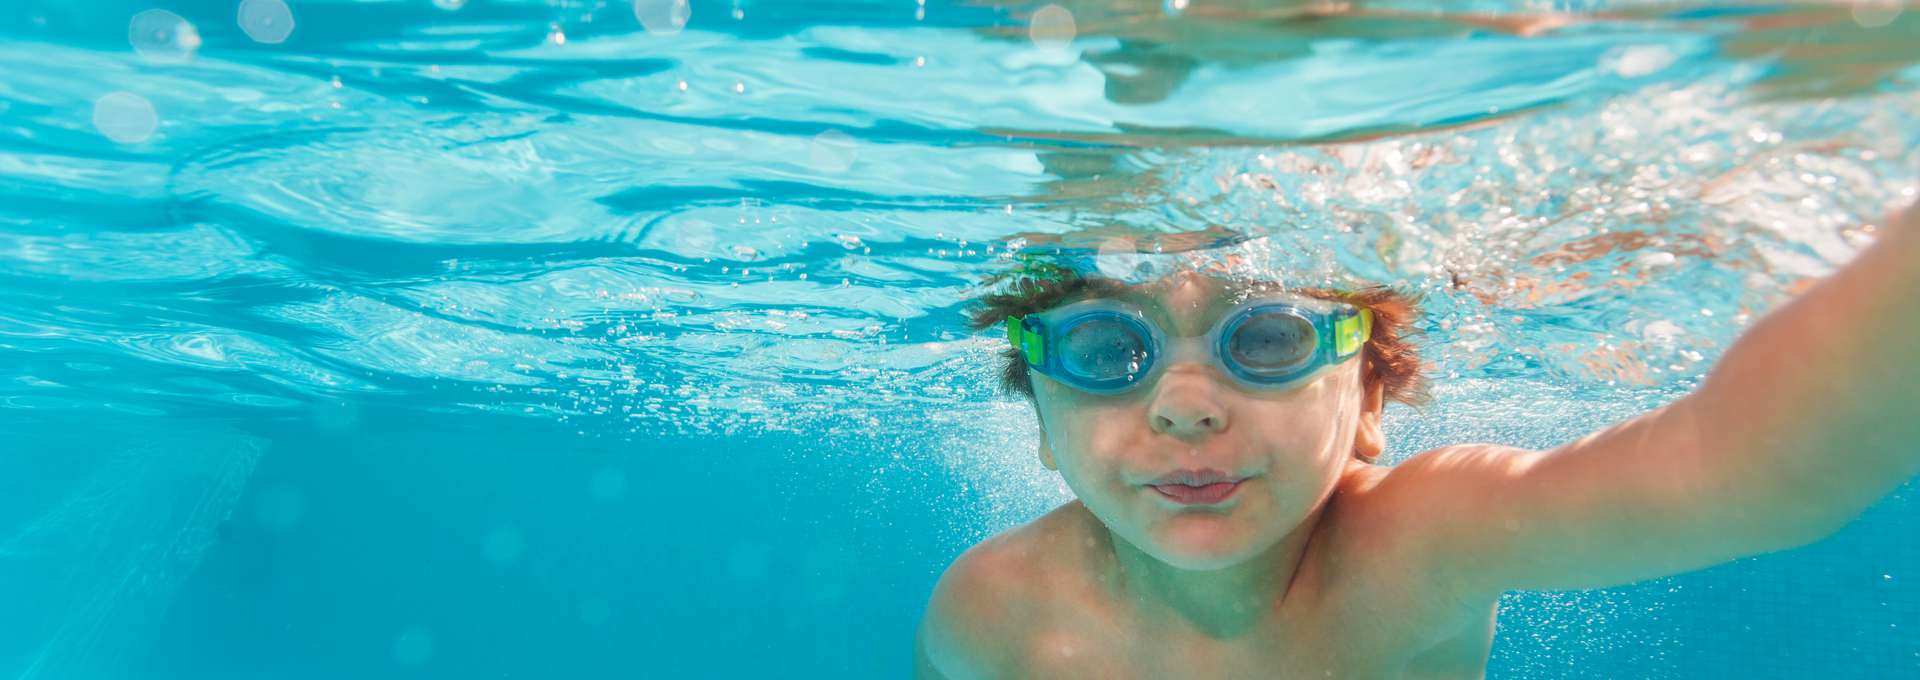 Small boy swimming wearing goggles under the crystal-clear water of swimming pool - underwater shoot